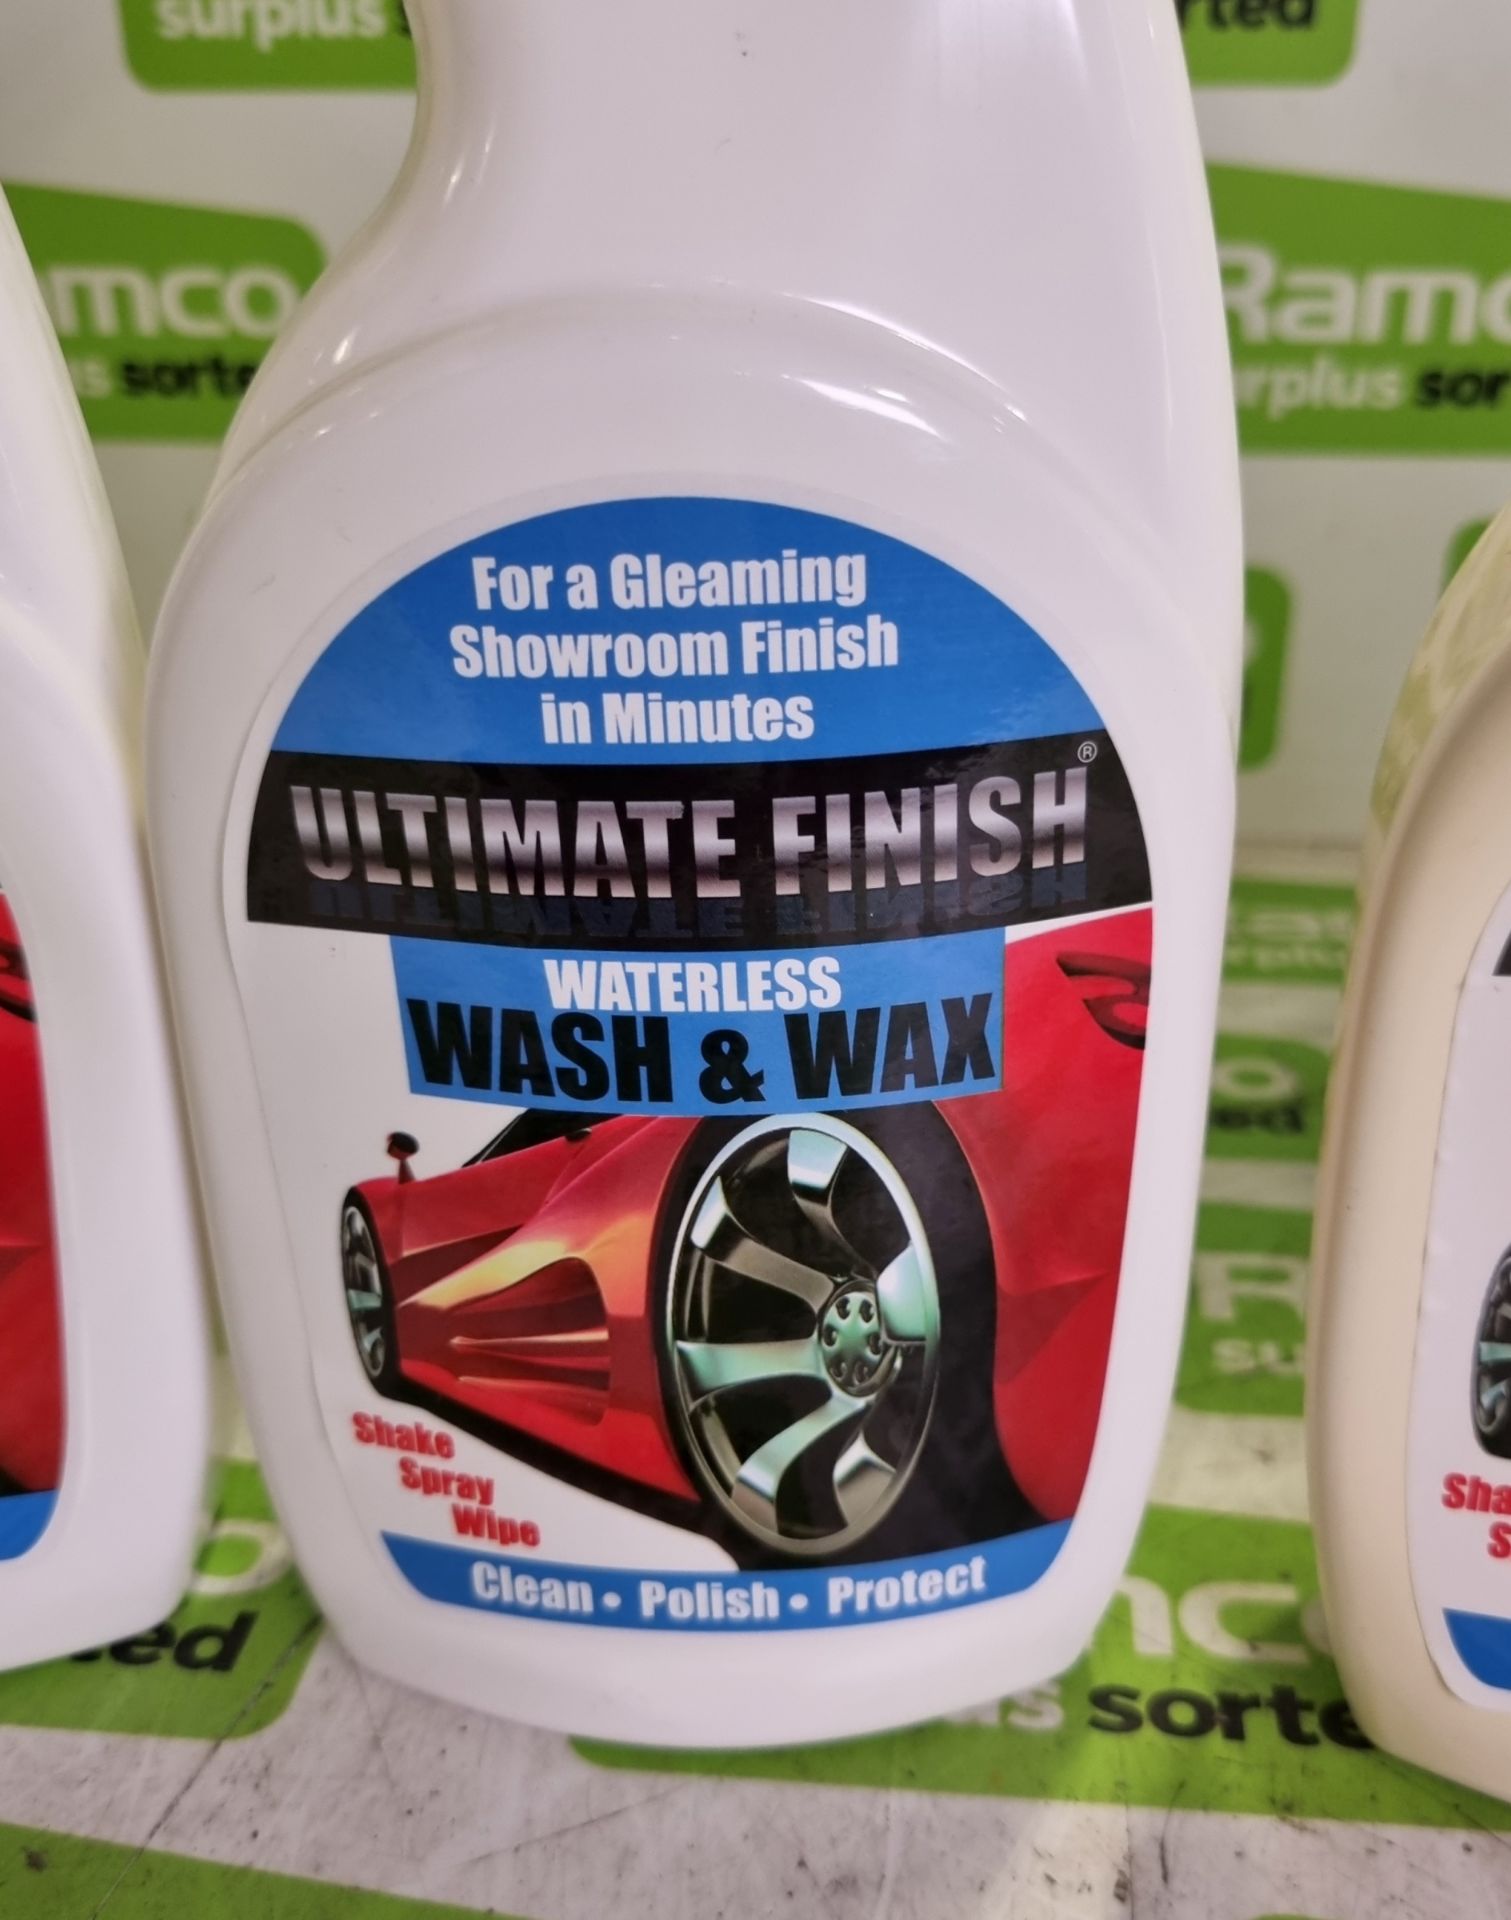 49x Ultimate Finish waterless wash & wax 4 packs (4x 750ml spray bottles & 4x microfibre cloths) - Image 5 of 6